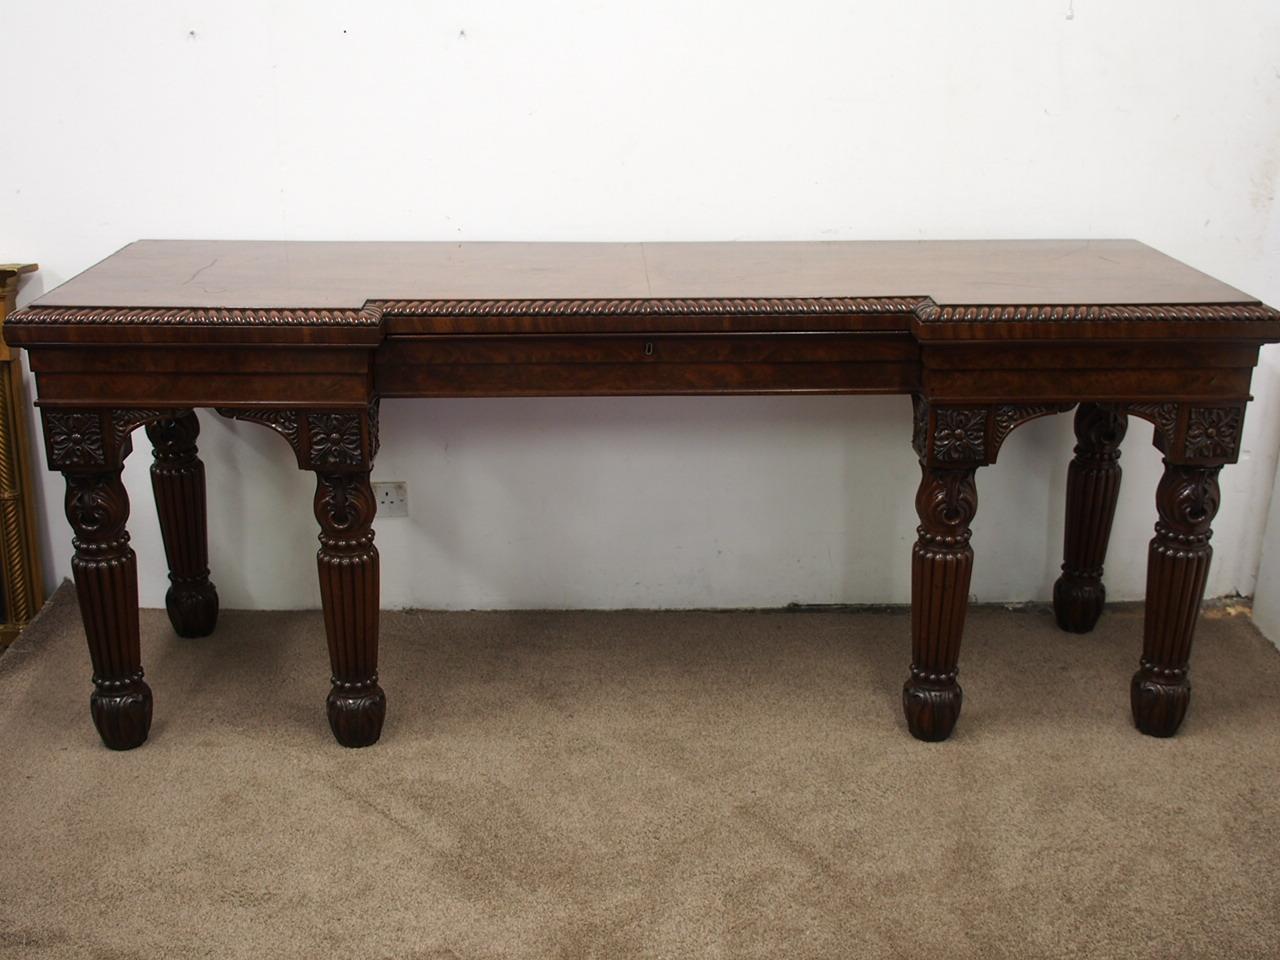 Regency inverted breakfront hall or serving table in Spanish flame mahogany, circa 1820. The inverted breakfront top is in mirror matched Spanish mahogany with a gadrooned edge above a deep moulded frieze. It has a centre drawer to the frieze, and